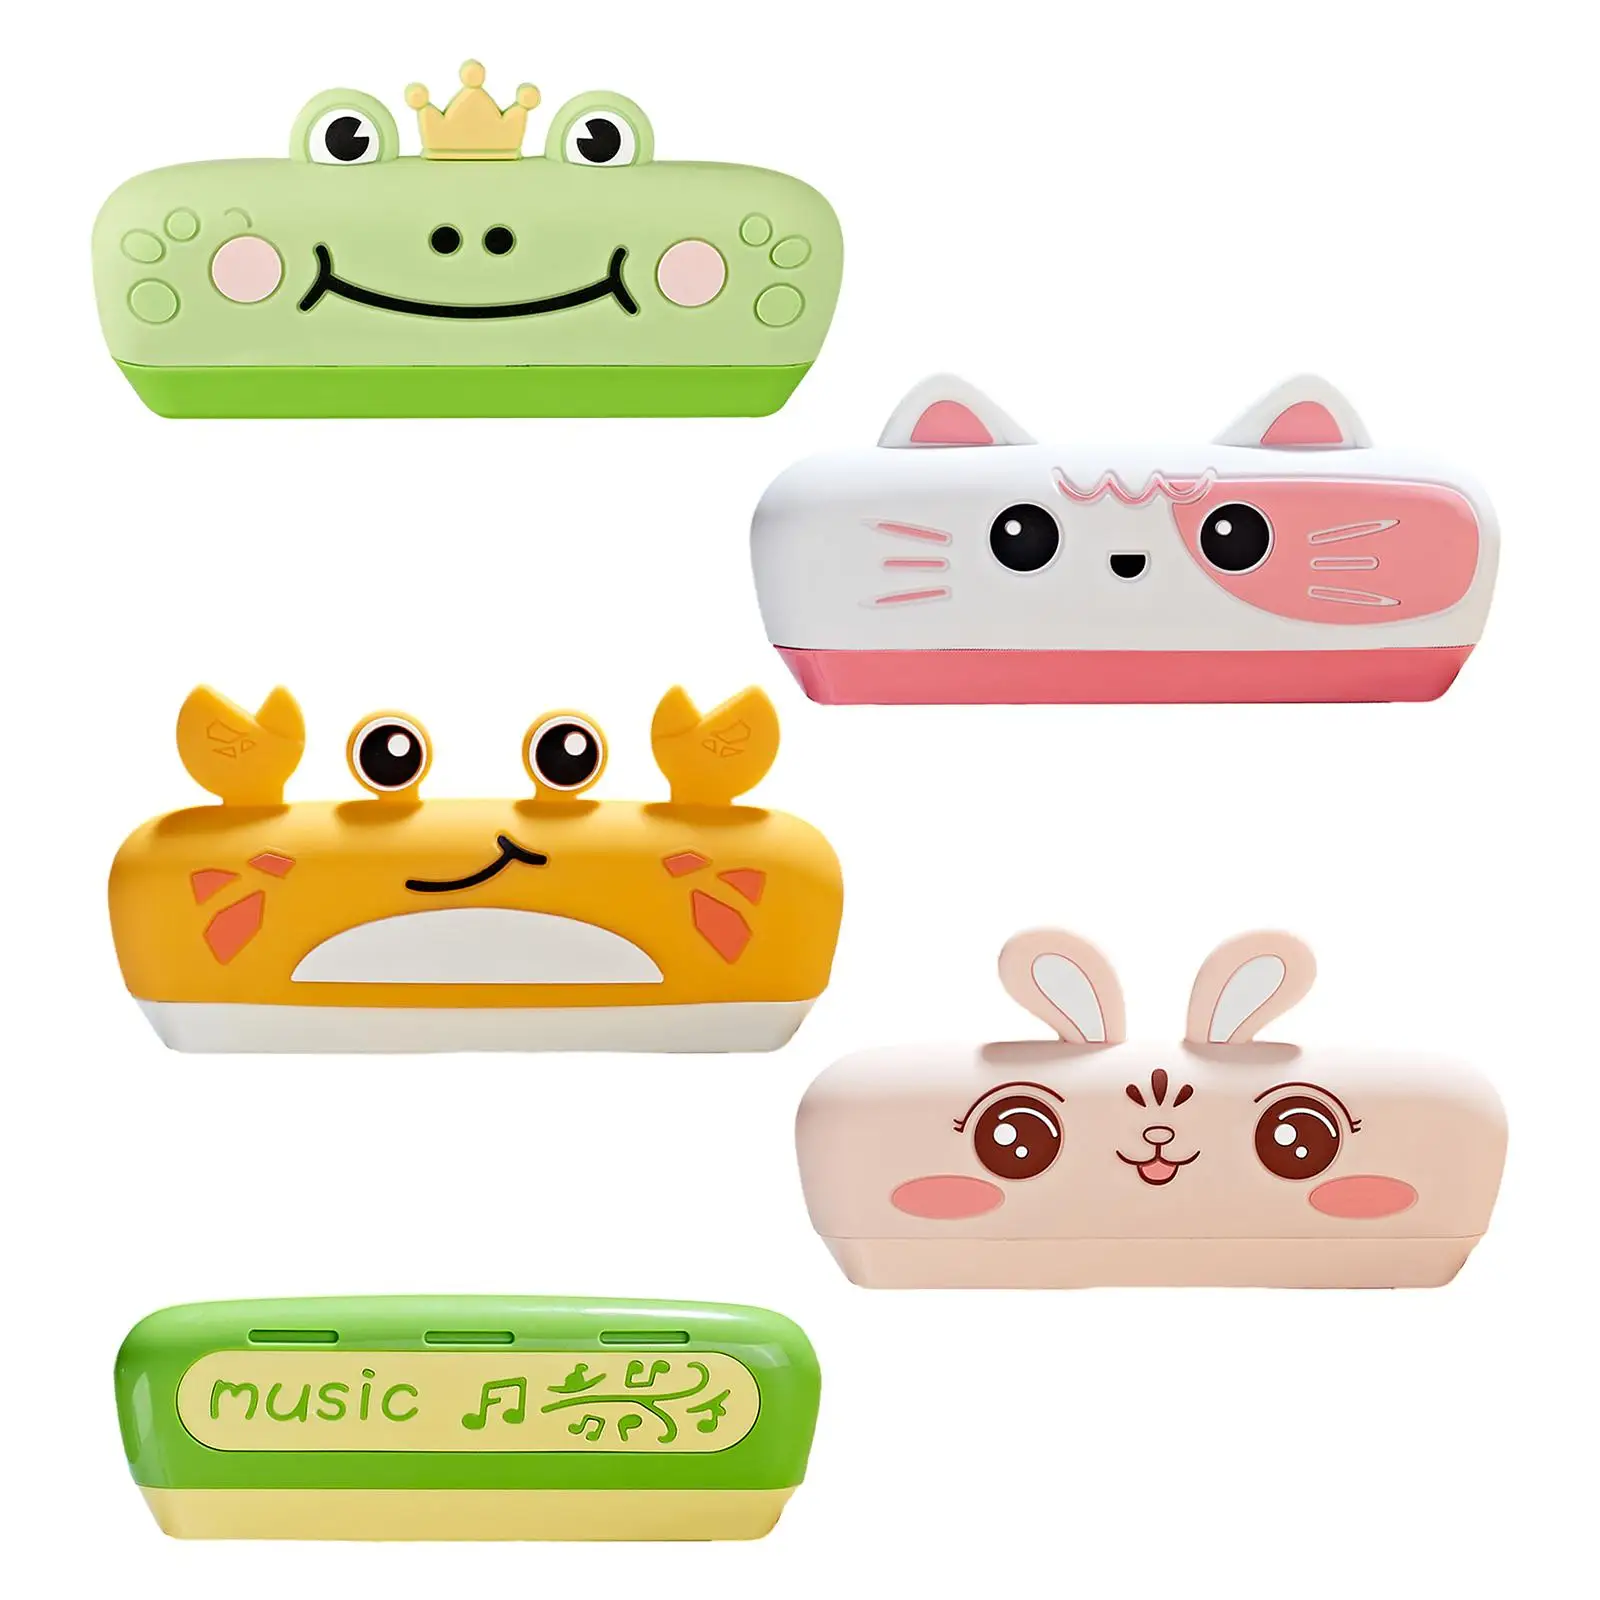 Musical Instrument Play Toy Silicone Portable Educational Kids Harmonica Mouth Organ for Travel Stage Party Classroom Toddlers